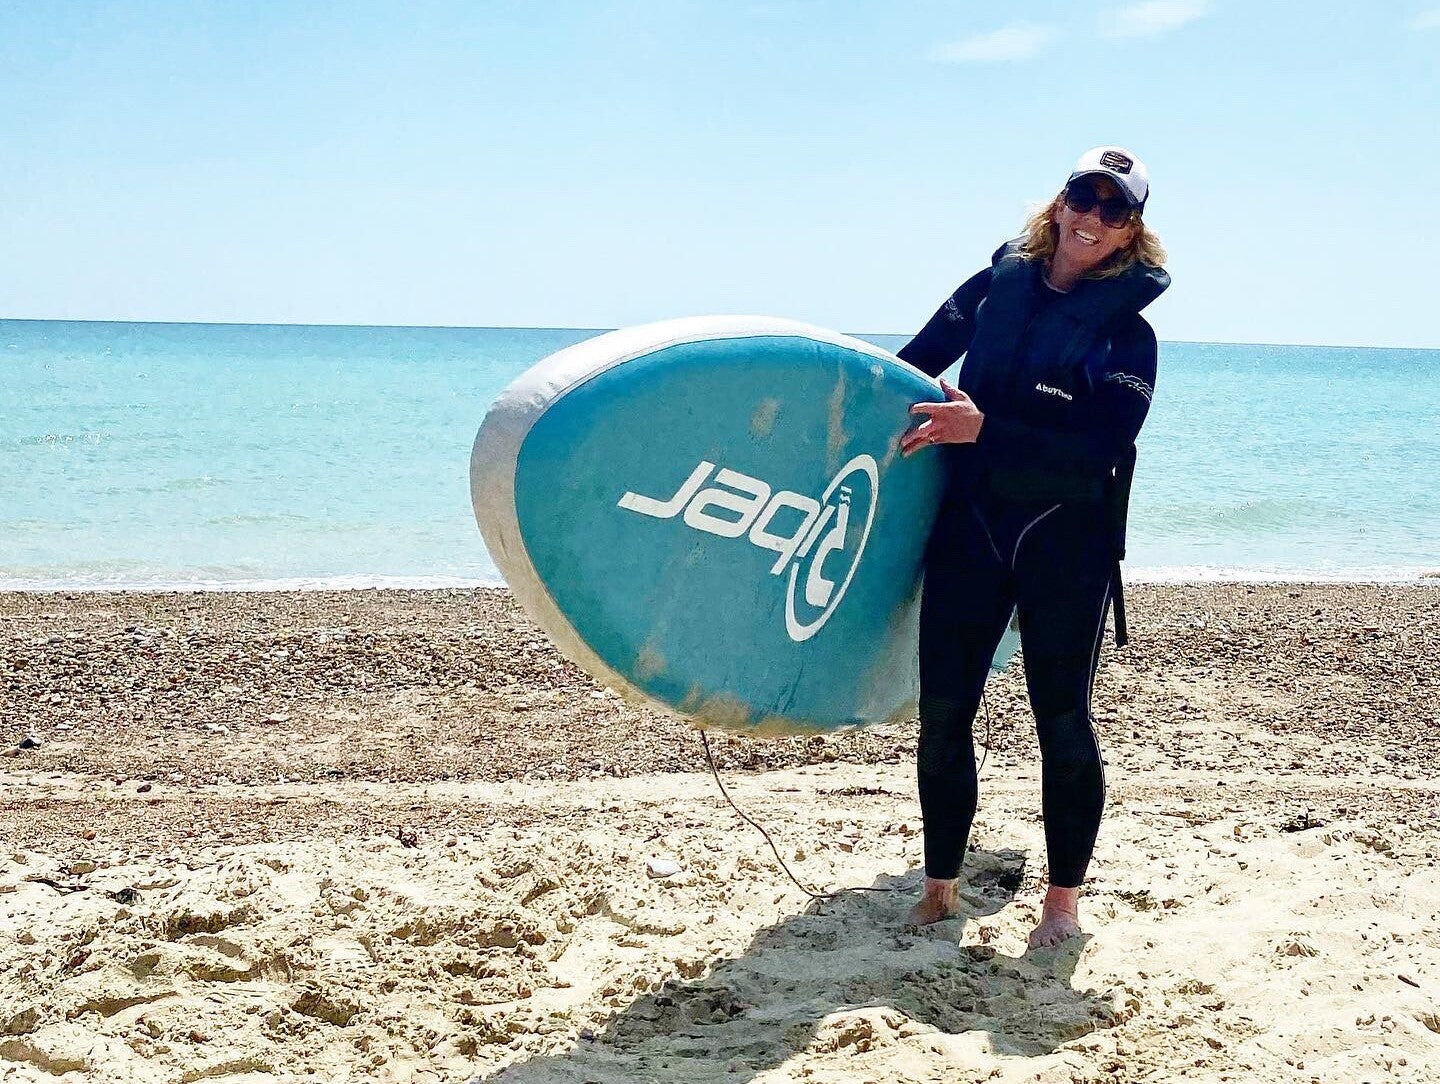 Review: The Riber 322 iSUP Paddleboard By Zoe Holland